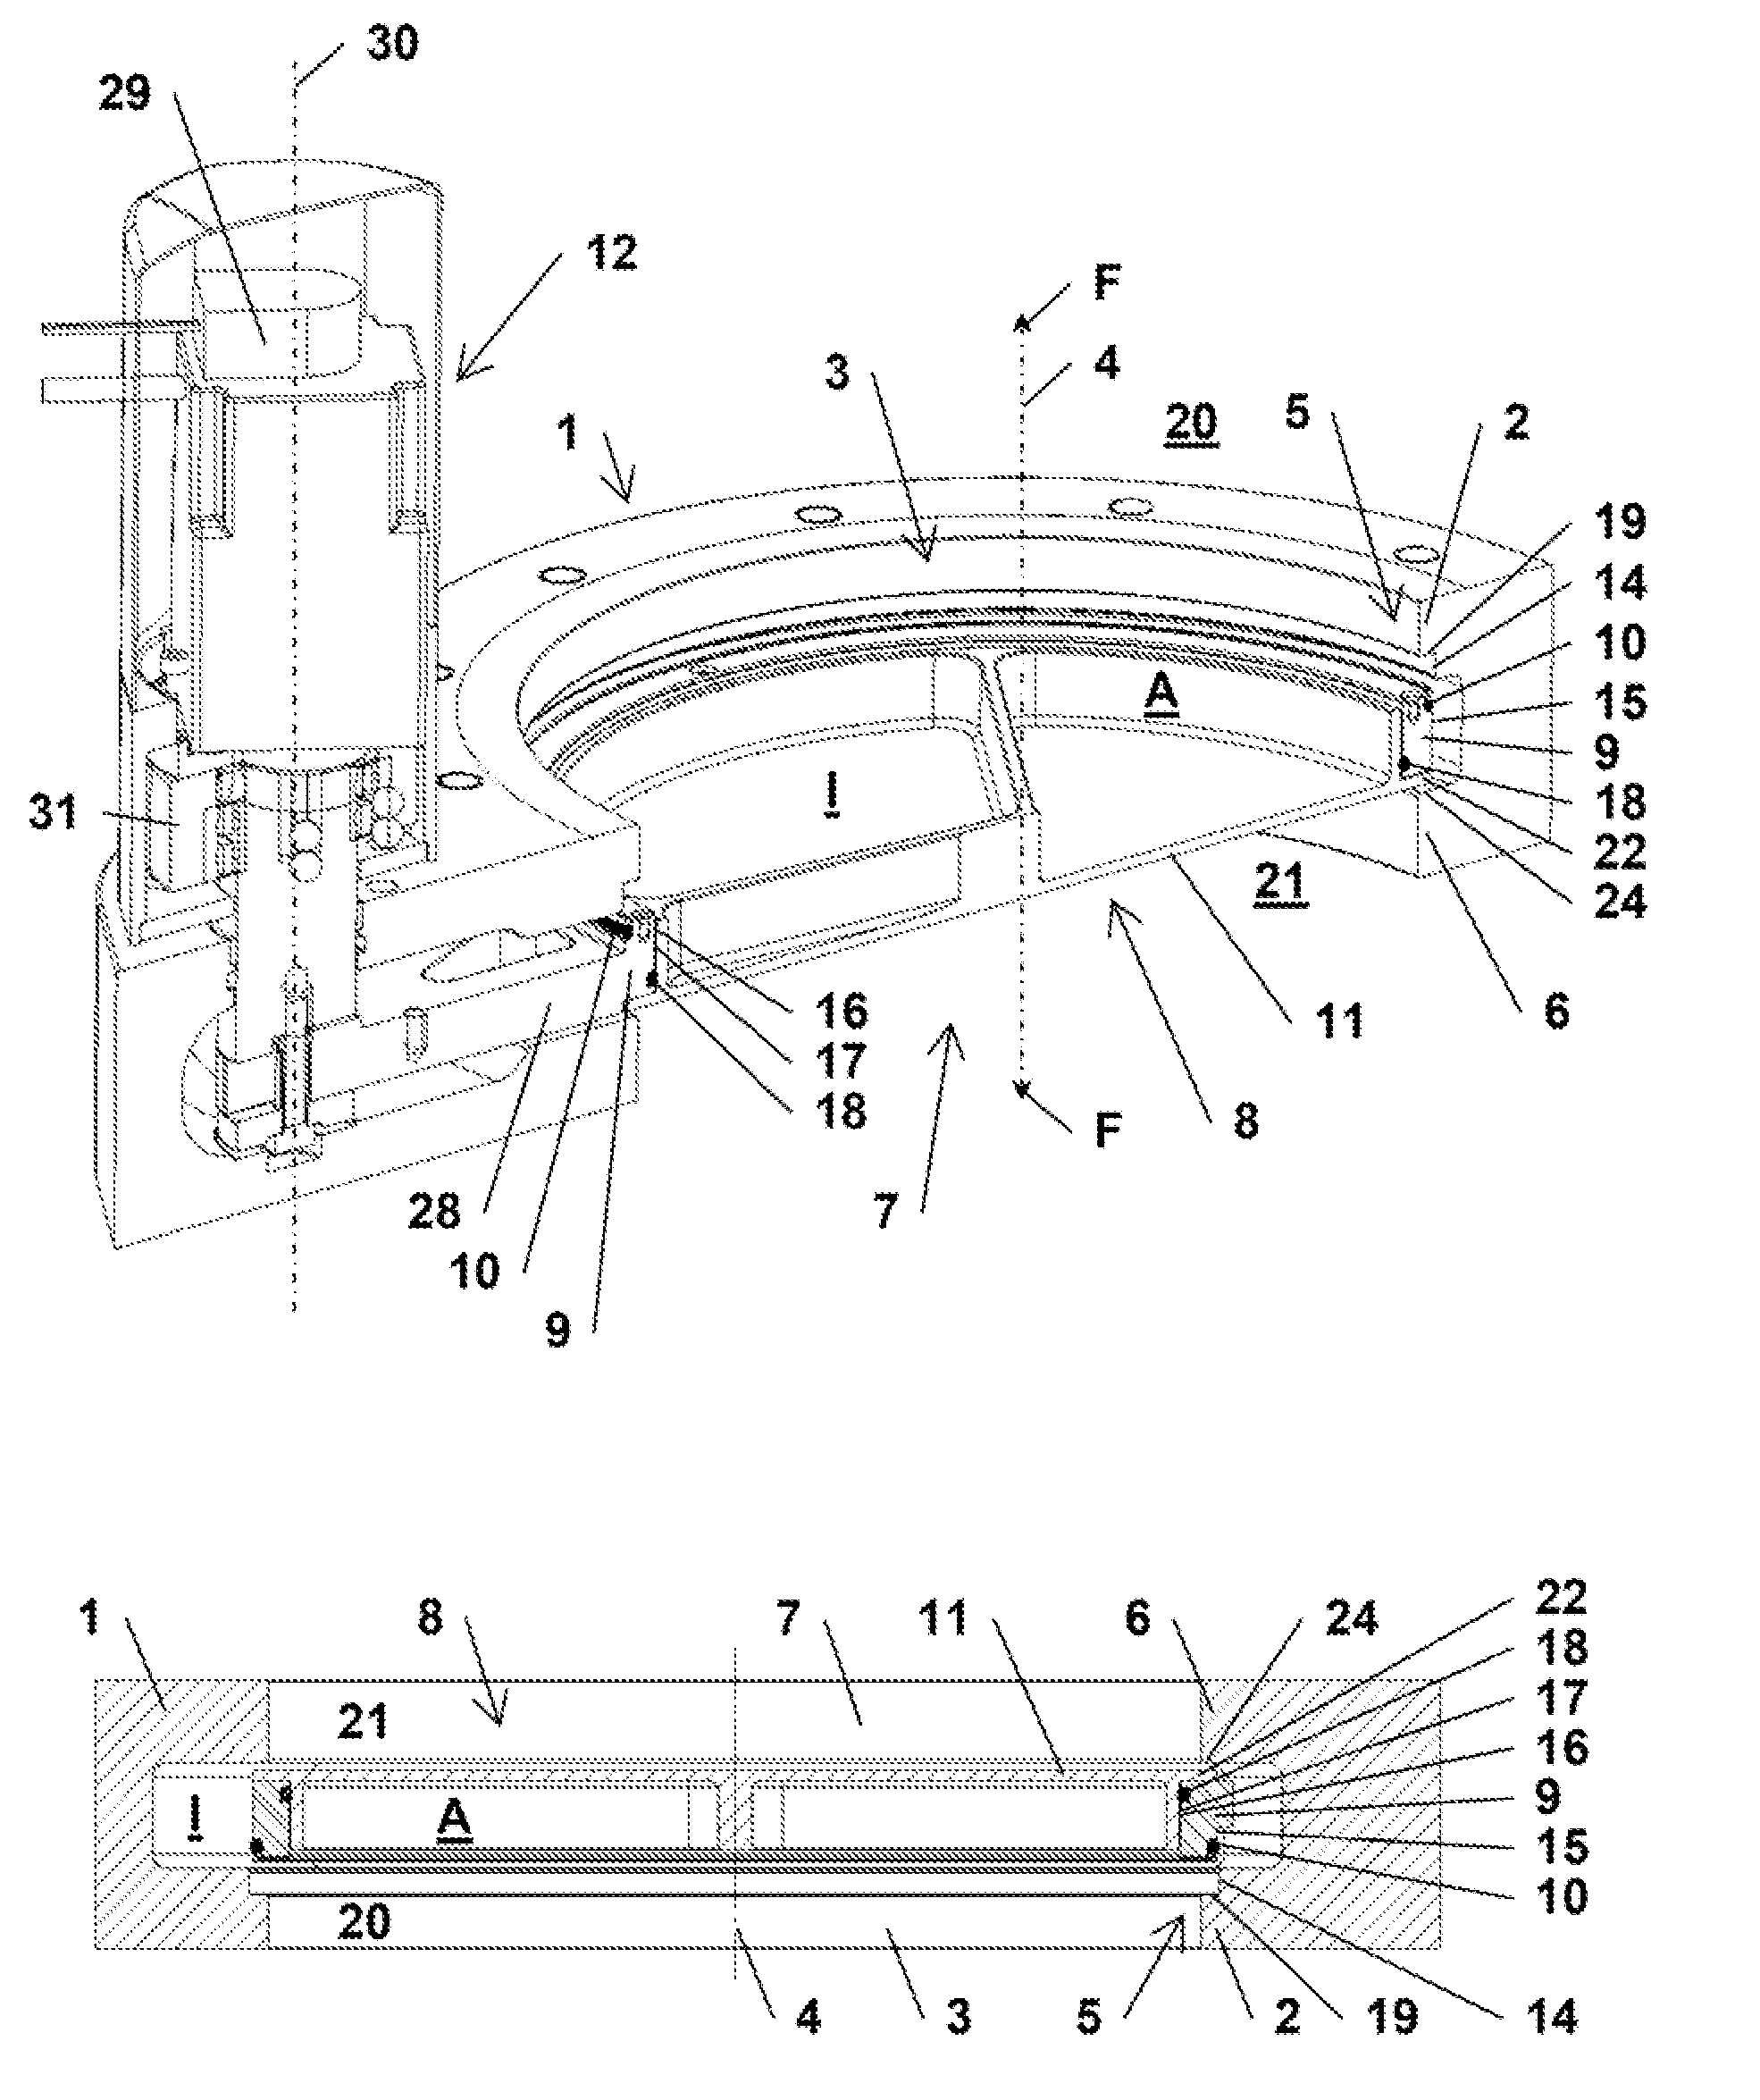 Valve for the substantially gas-tight interruption of a flow path